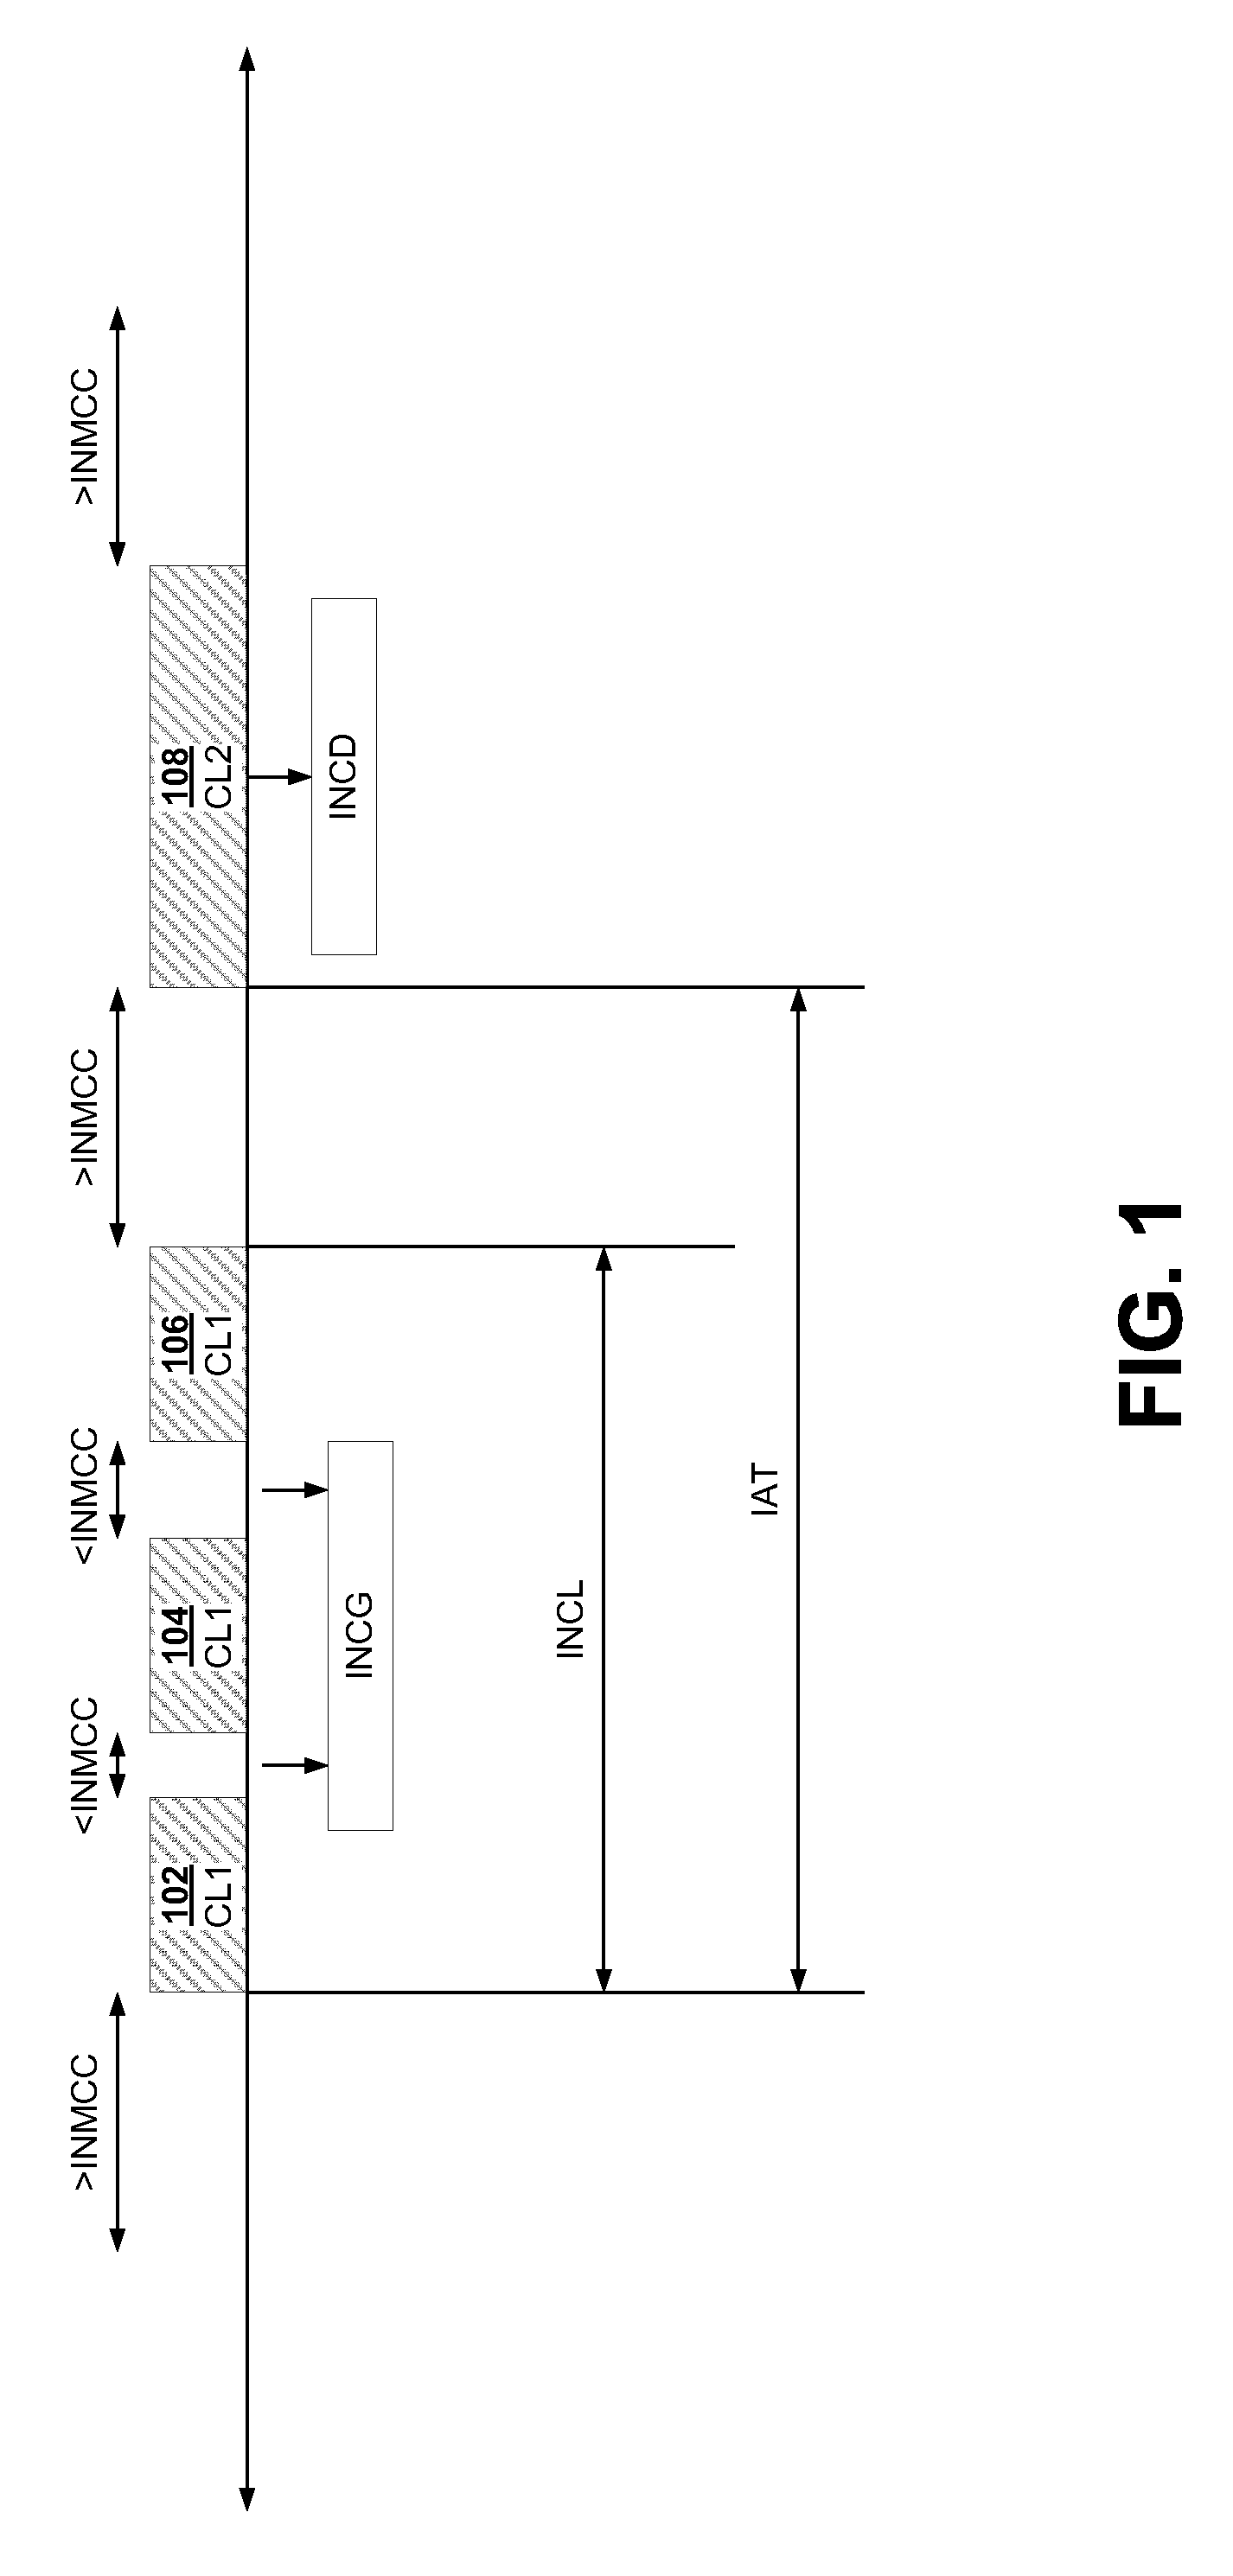 Systems and Methods for Impulse Noise Characterization